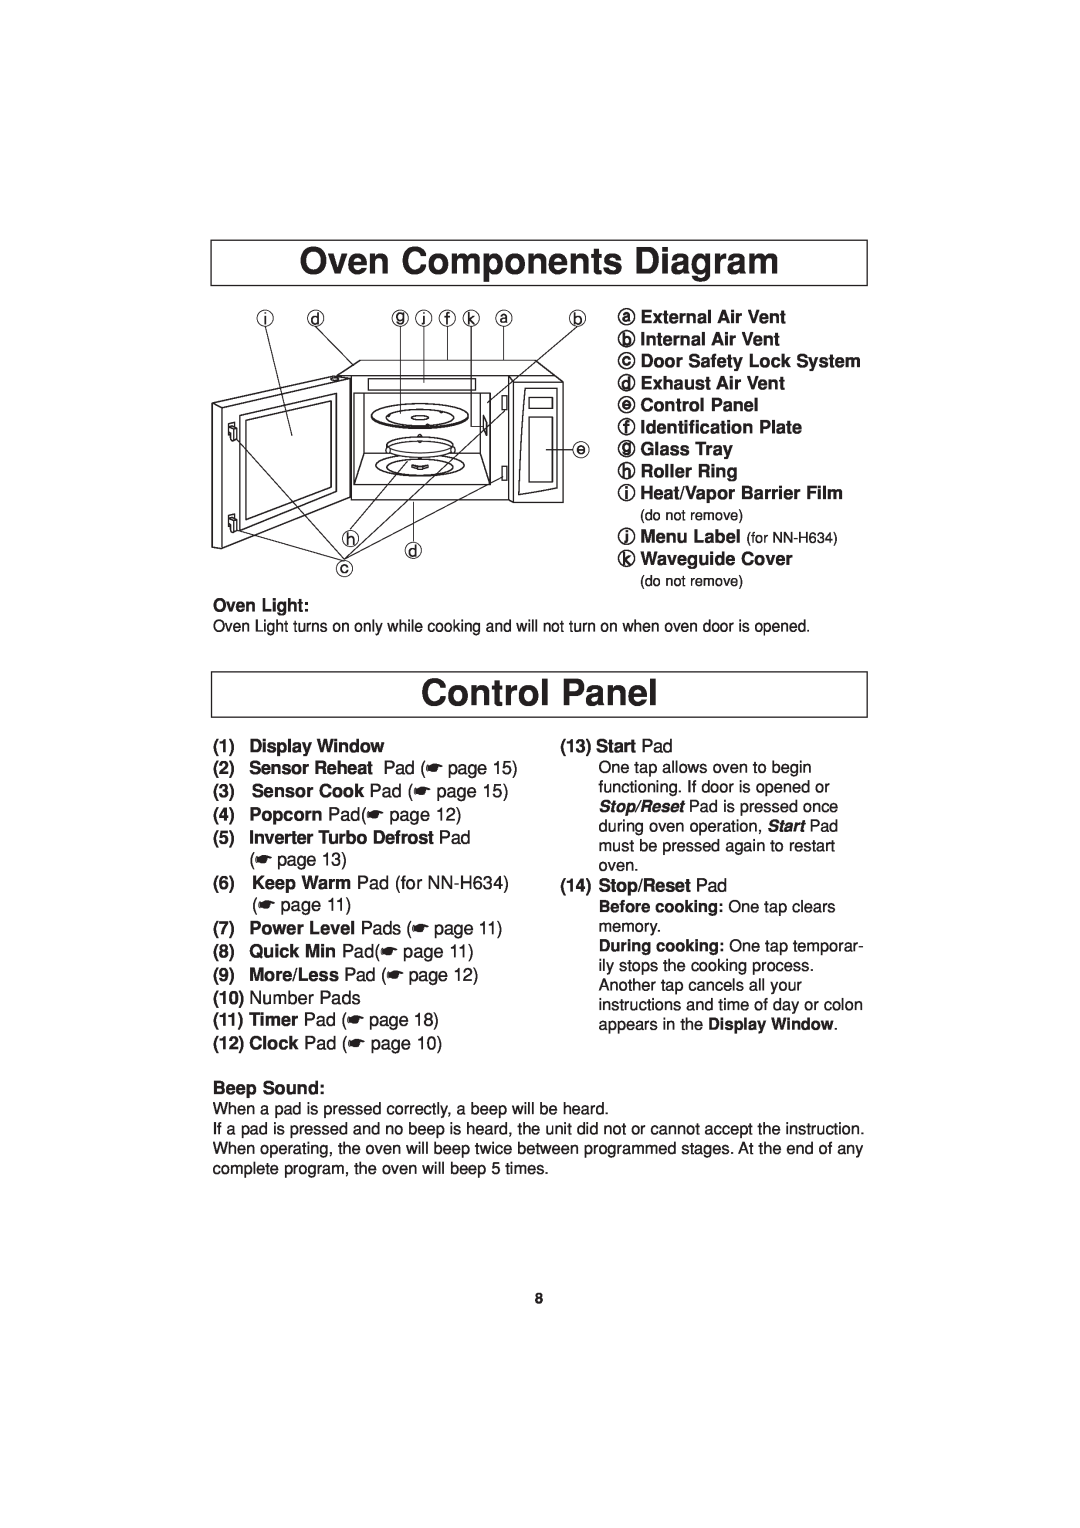 Panasonic NN-H644, NN-H634 important safety instructions Oven Components Diagram, Control Panel 